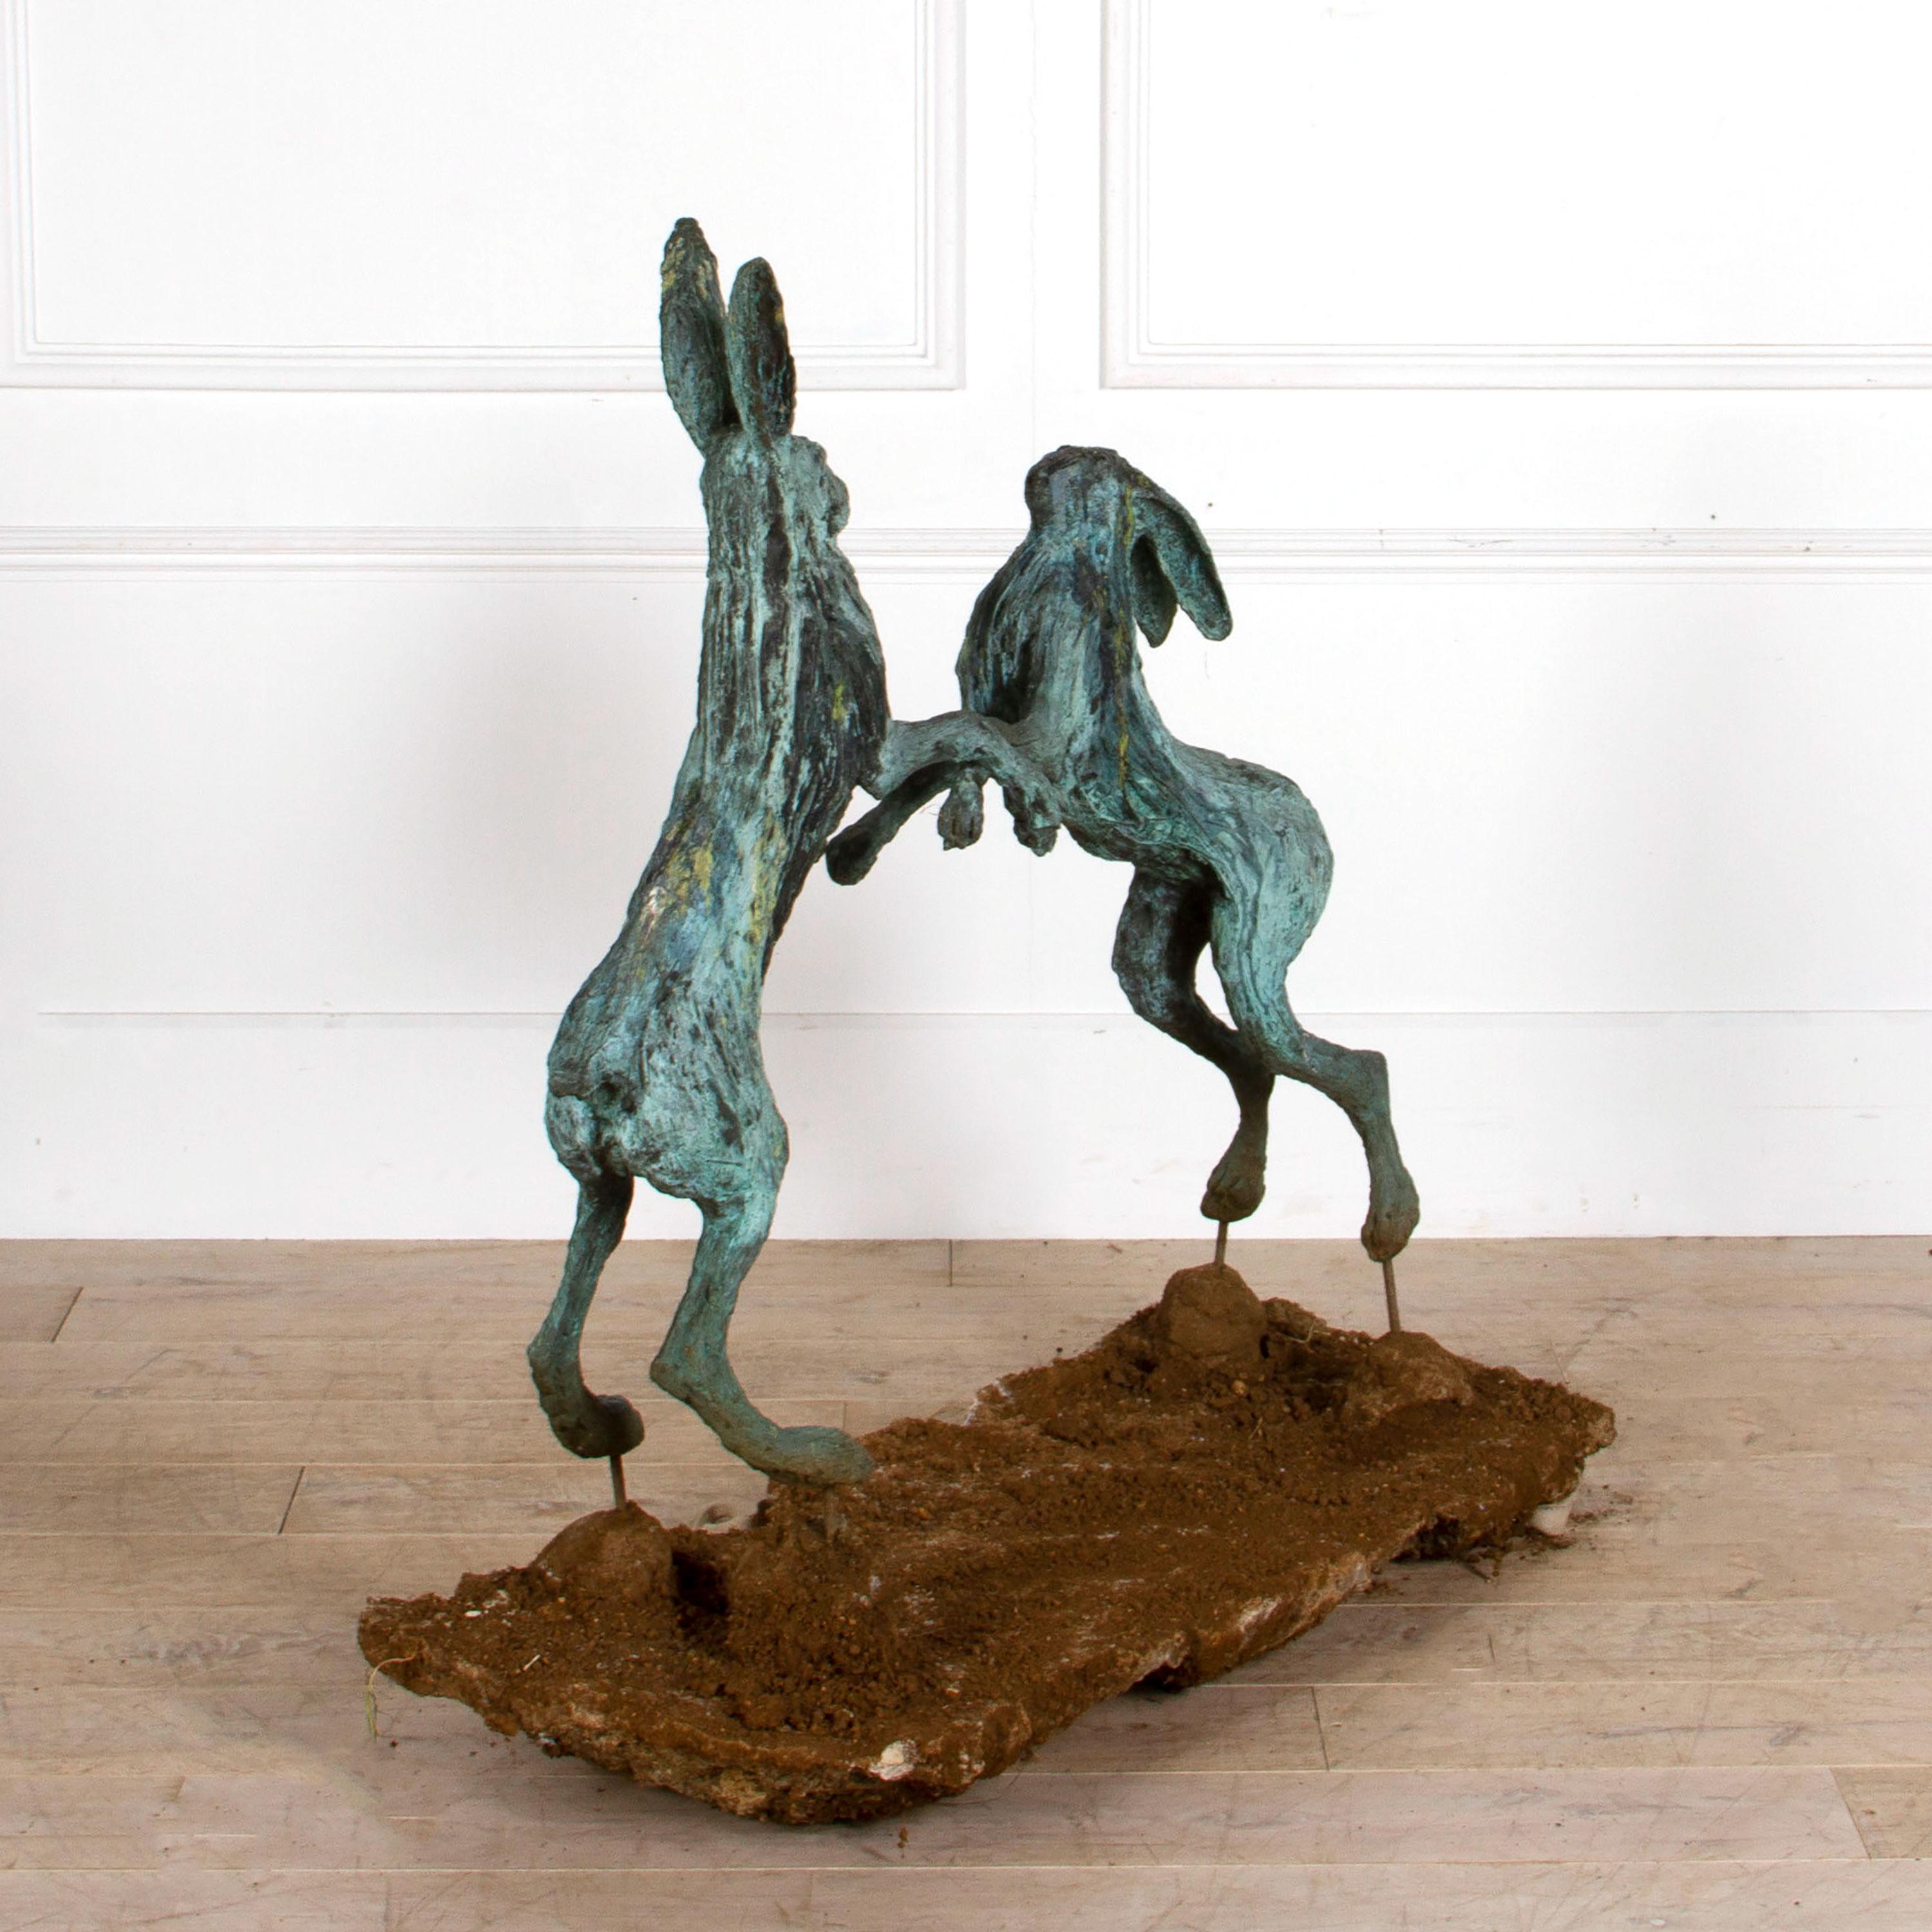 Boxing Hares II is an important work by the acclaimed Cotswold artist Sophie Ryder, which is internationally renowned and permanently represented in many collections and galleries. Sophie Ryder creates such striking sculptures through her method of